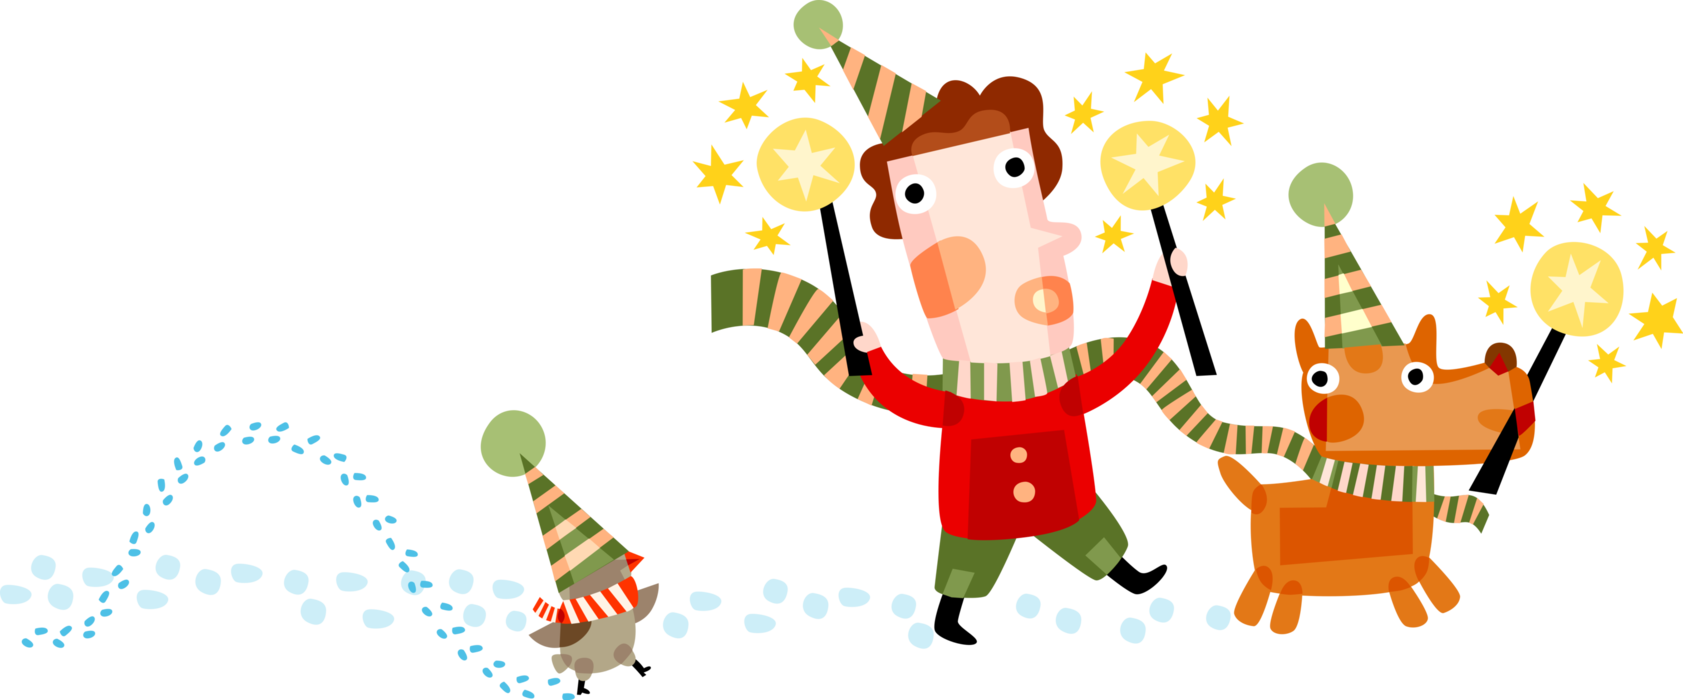 Vector Illustration of Boy with Pet Dog and Bird Carry Candles and Sing Christmas Carols